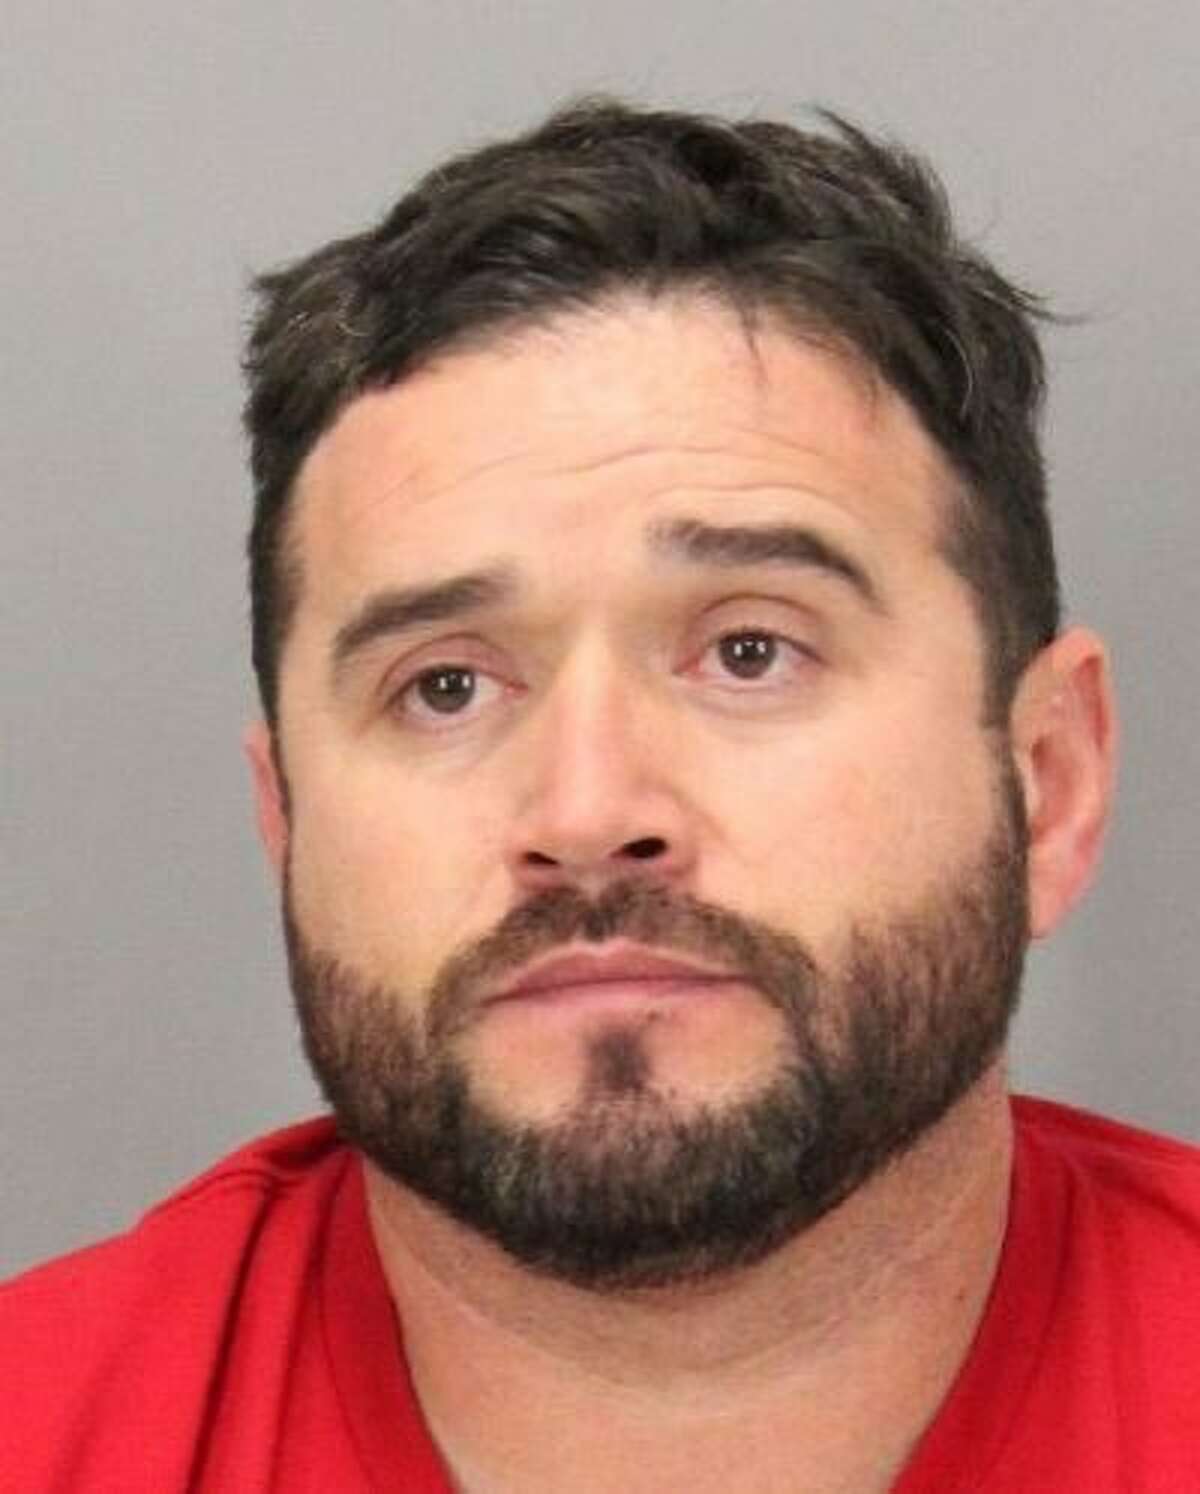 Ubaldo Montaras Munoz, 39, was arrested on suspicion of hit and run and vehicular manslaughter after fatally striking a pedestrian Saturday night in San Jose, police said.